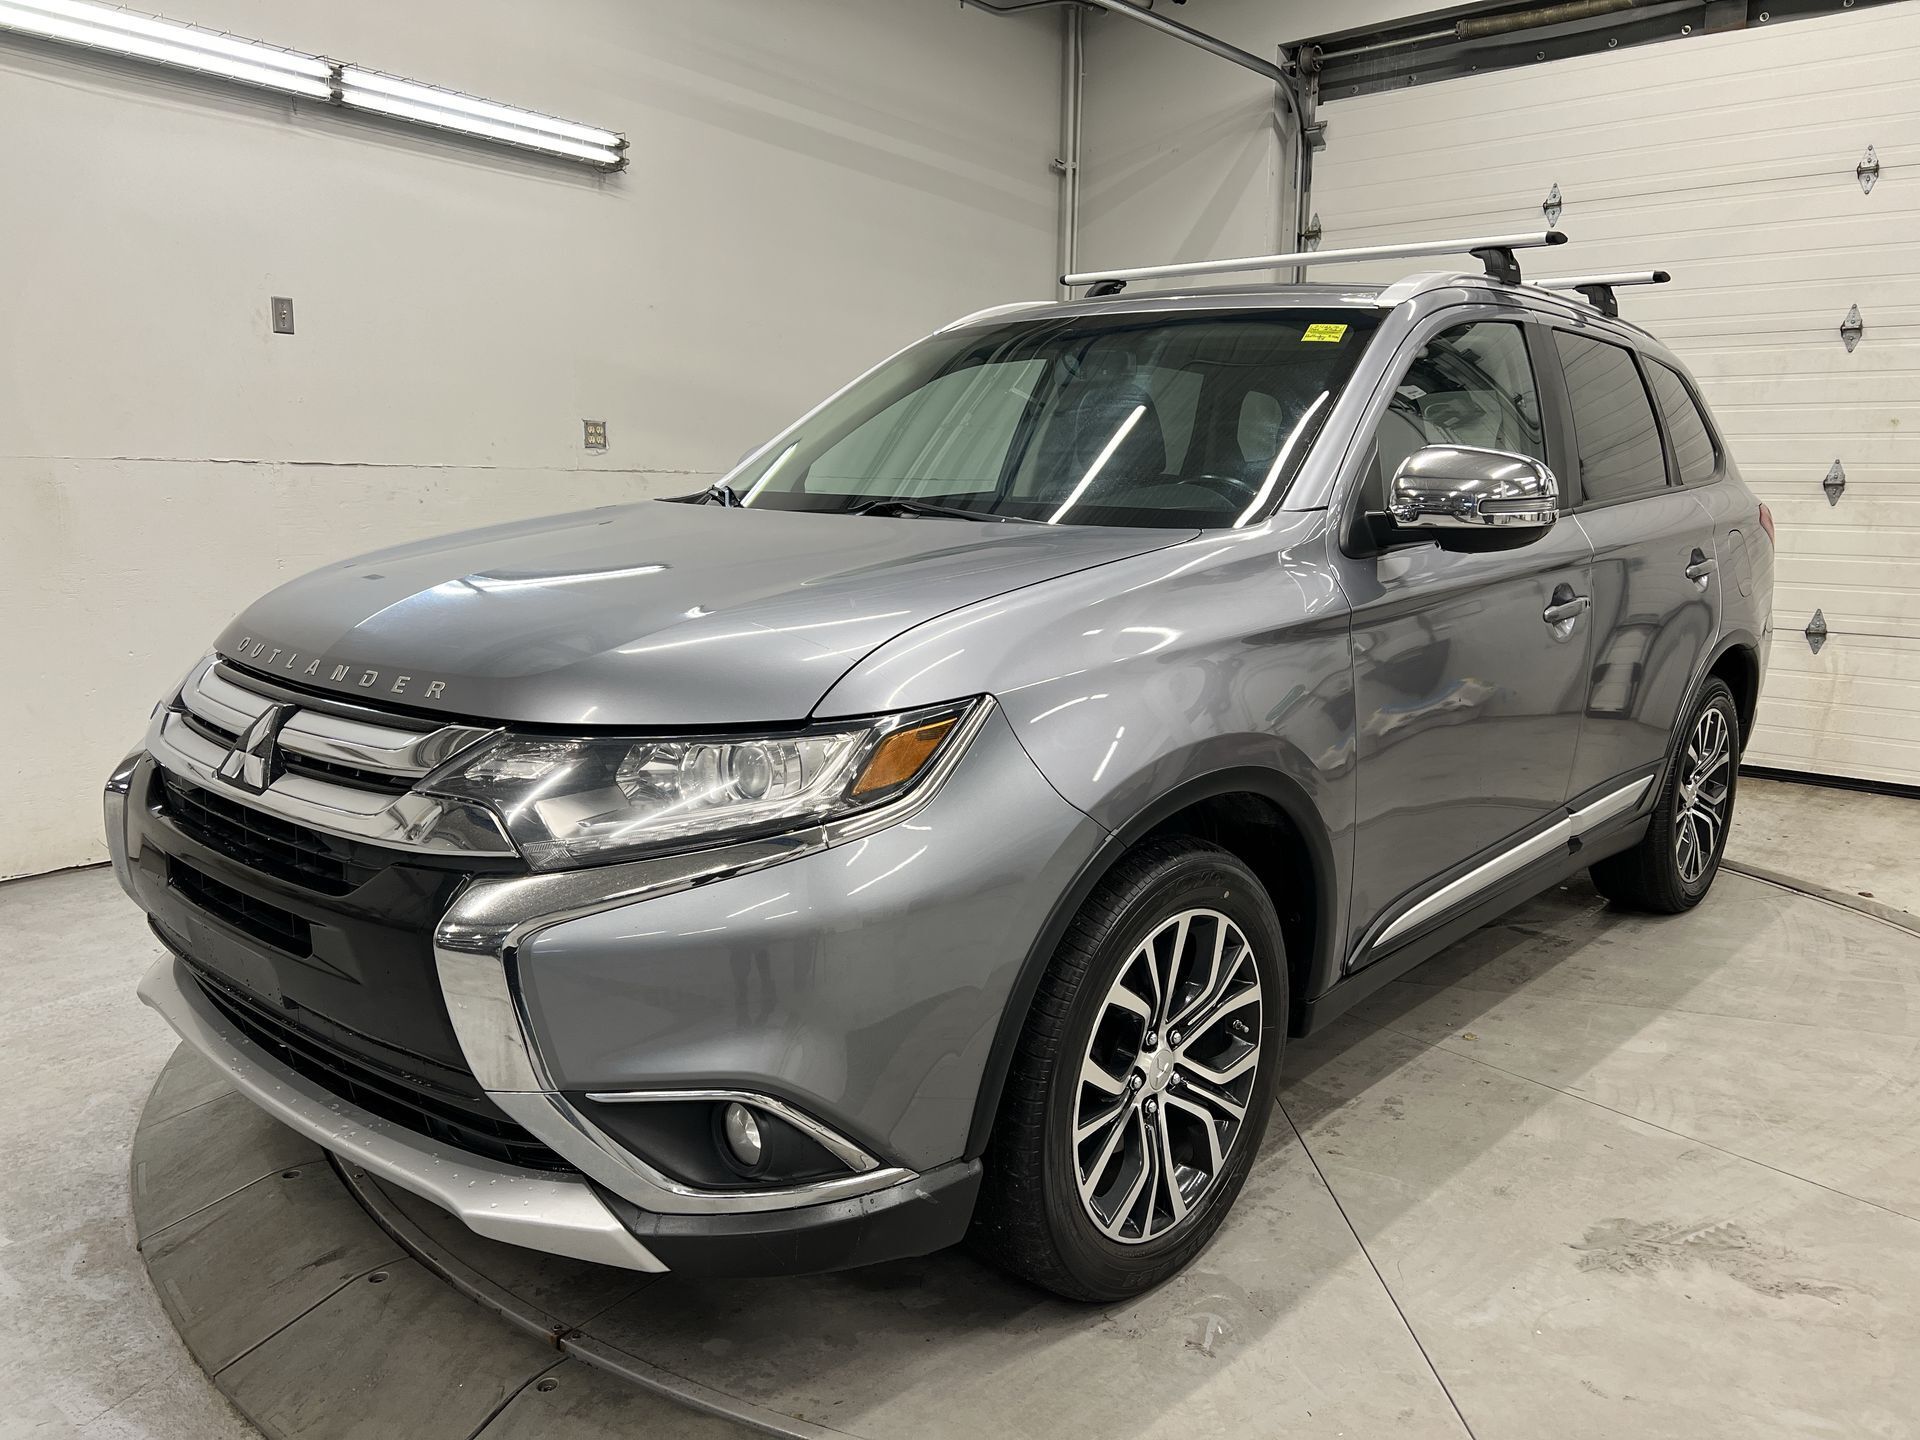 2016 Mitsubishi Outlander ES PREMIUM AWC | SUNROOF | HTD LEATHER | LOW KMS!